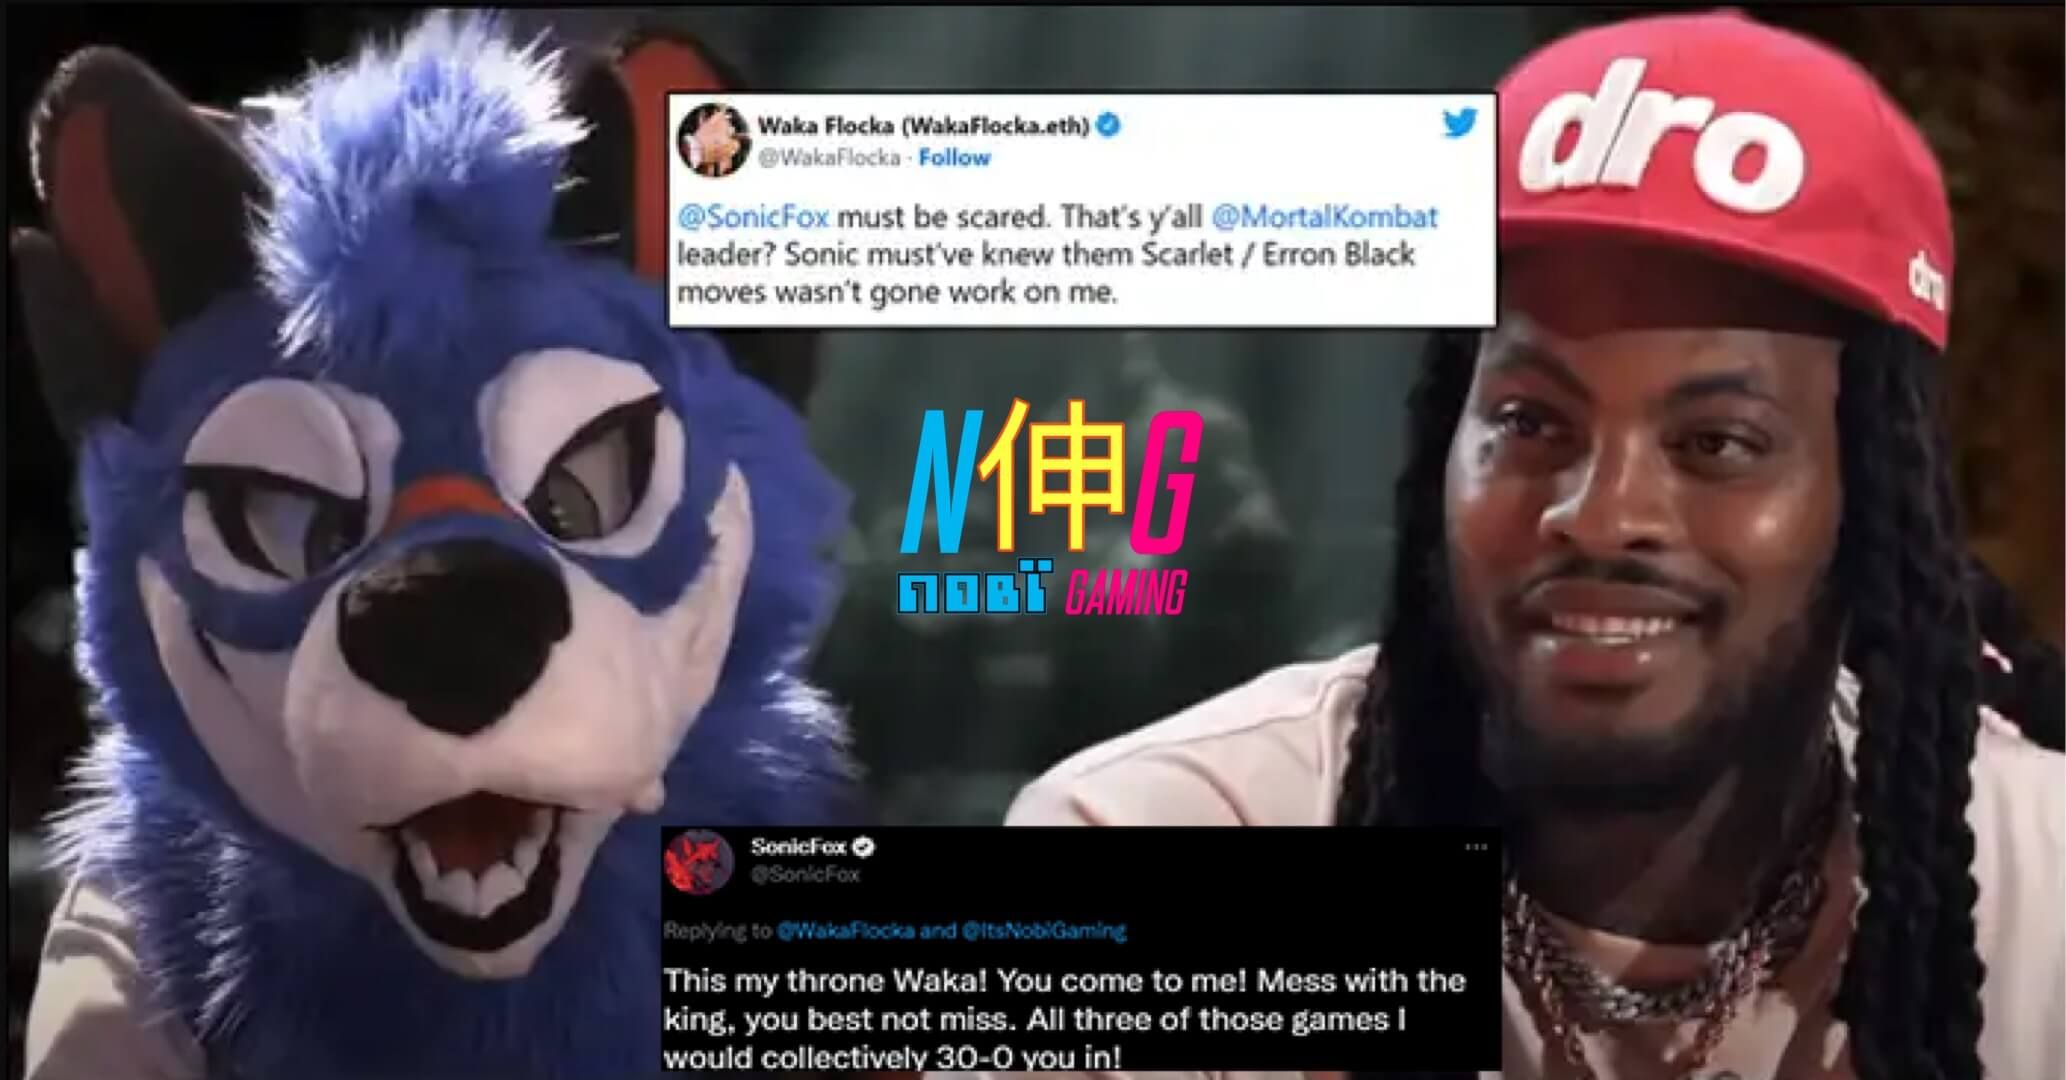 Waka Flocka vs. Sonic Fox Exhibition Match is a Real Thing